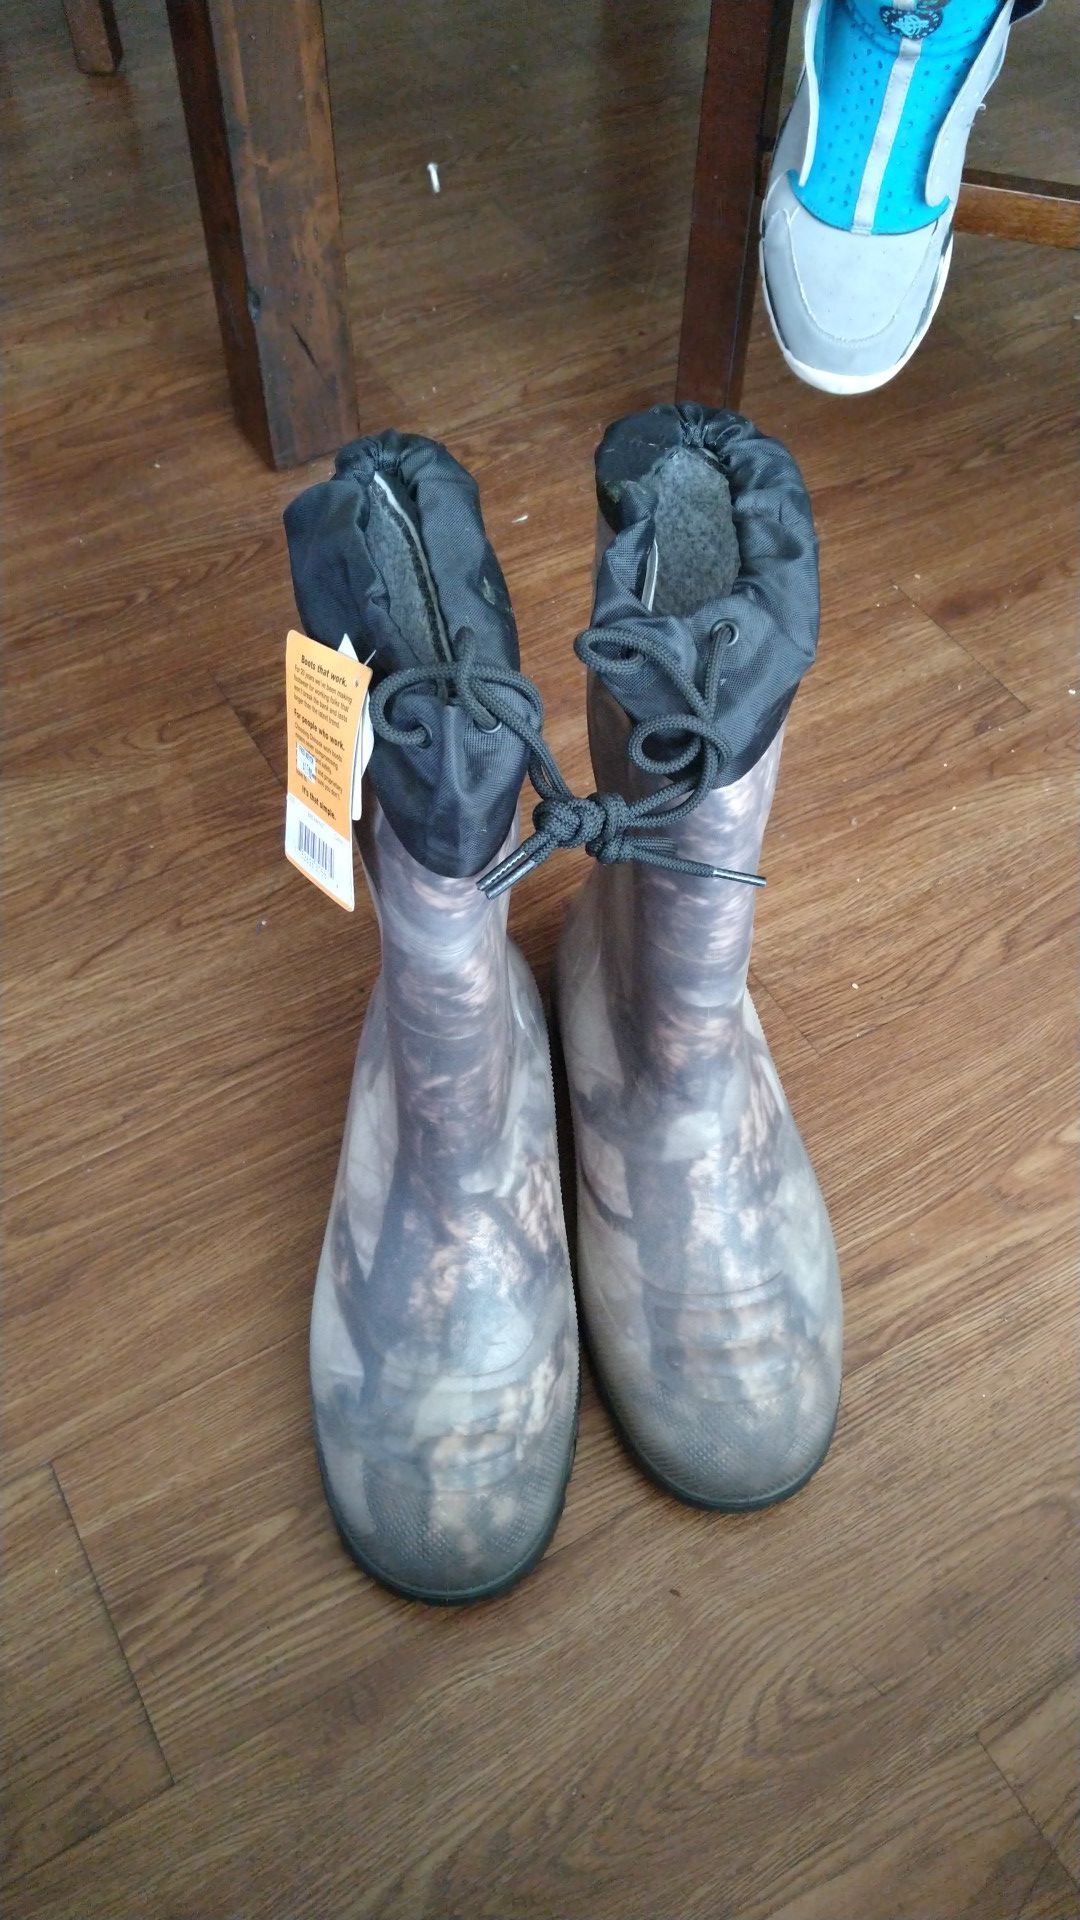 Rubber work boots